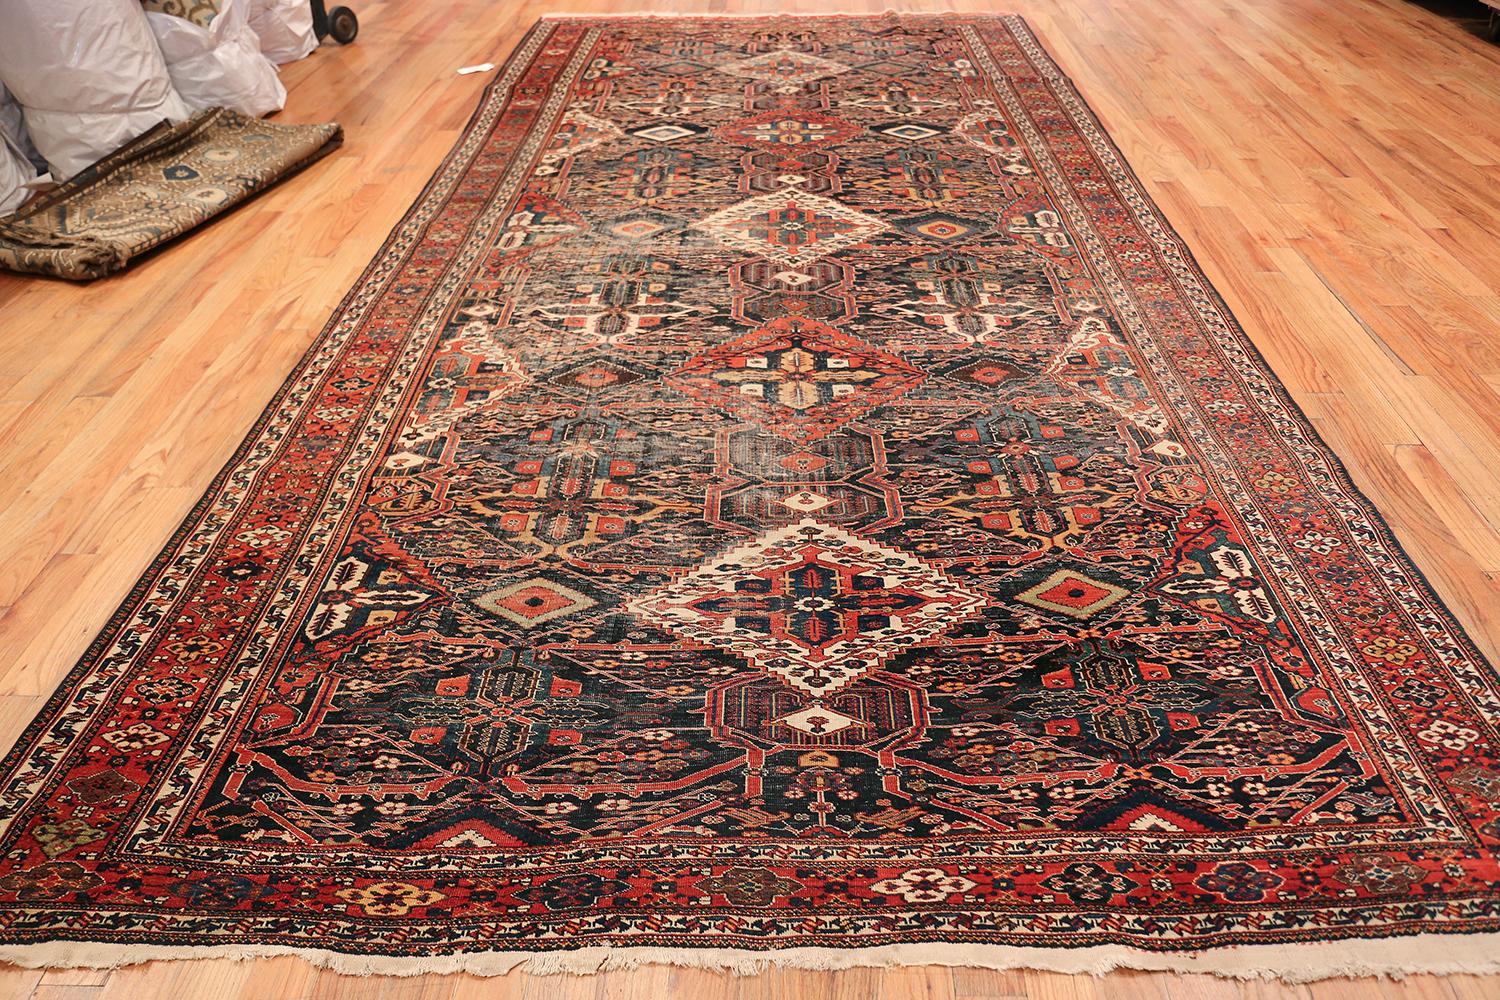 Extremely fine Tribal Persian Bakhtiari antique shabby Chic rug, country of origin or rug type: Persian rug, circa late 19th century. Size: 7 ft x 14 ft 3 in (2.13 m x 4.34 m)

This breathtaking and fine antique shabby Chic rug features a